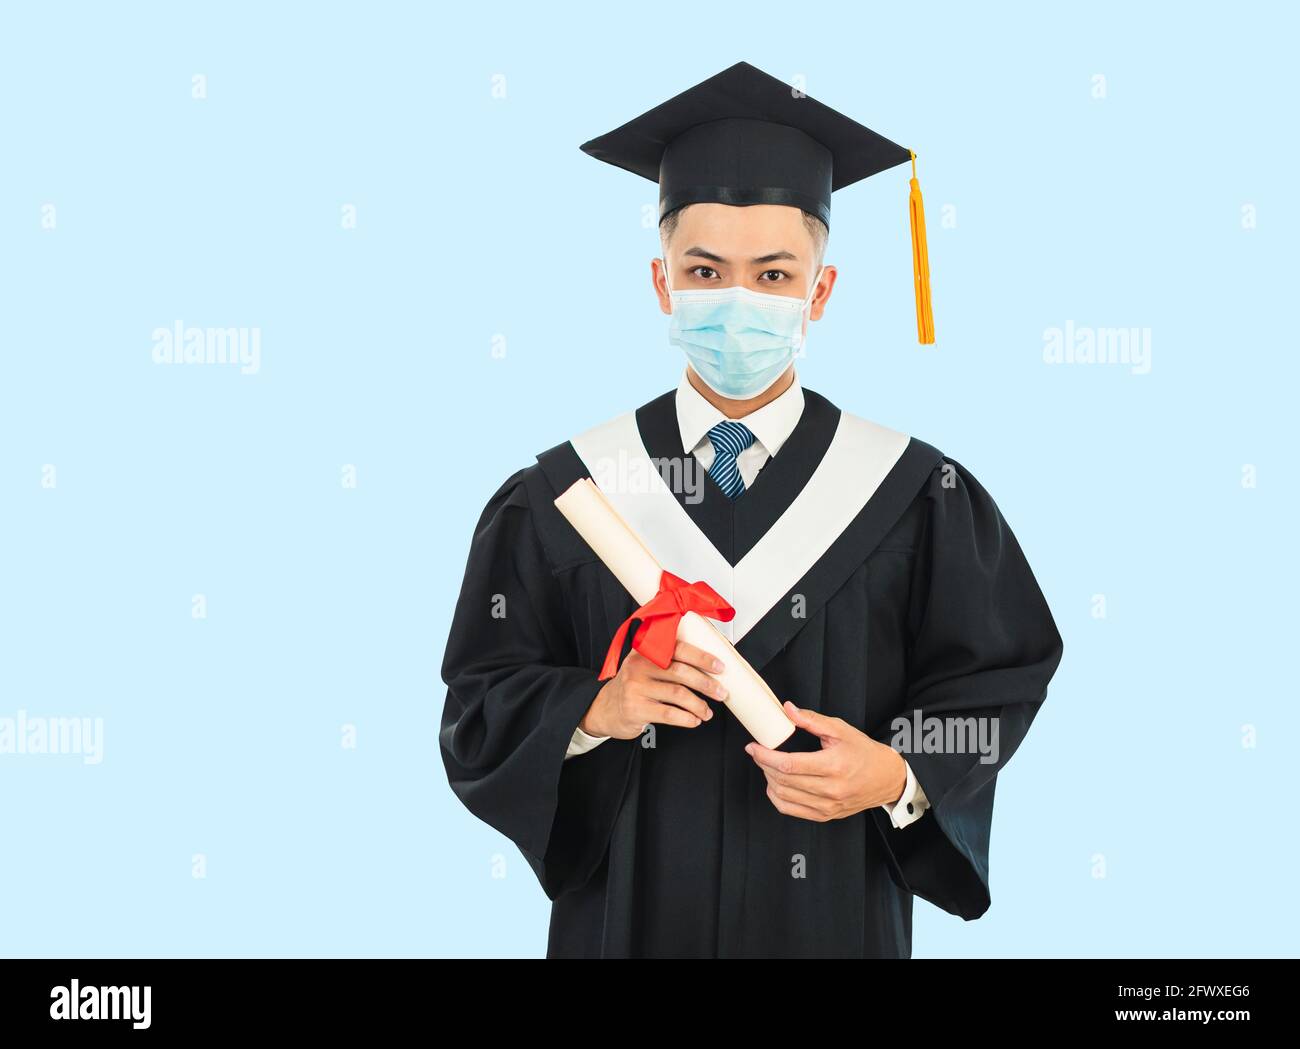 young male graduation wearing face mask and holding his college certificate during the coronavirus pandemic Stock Photo